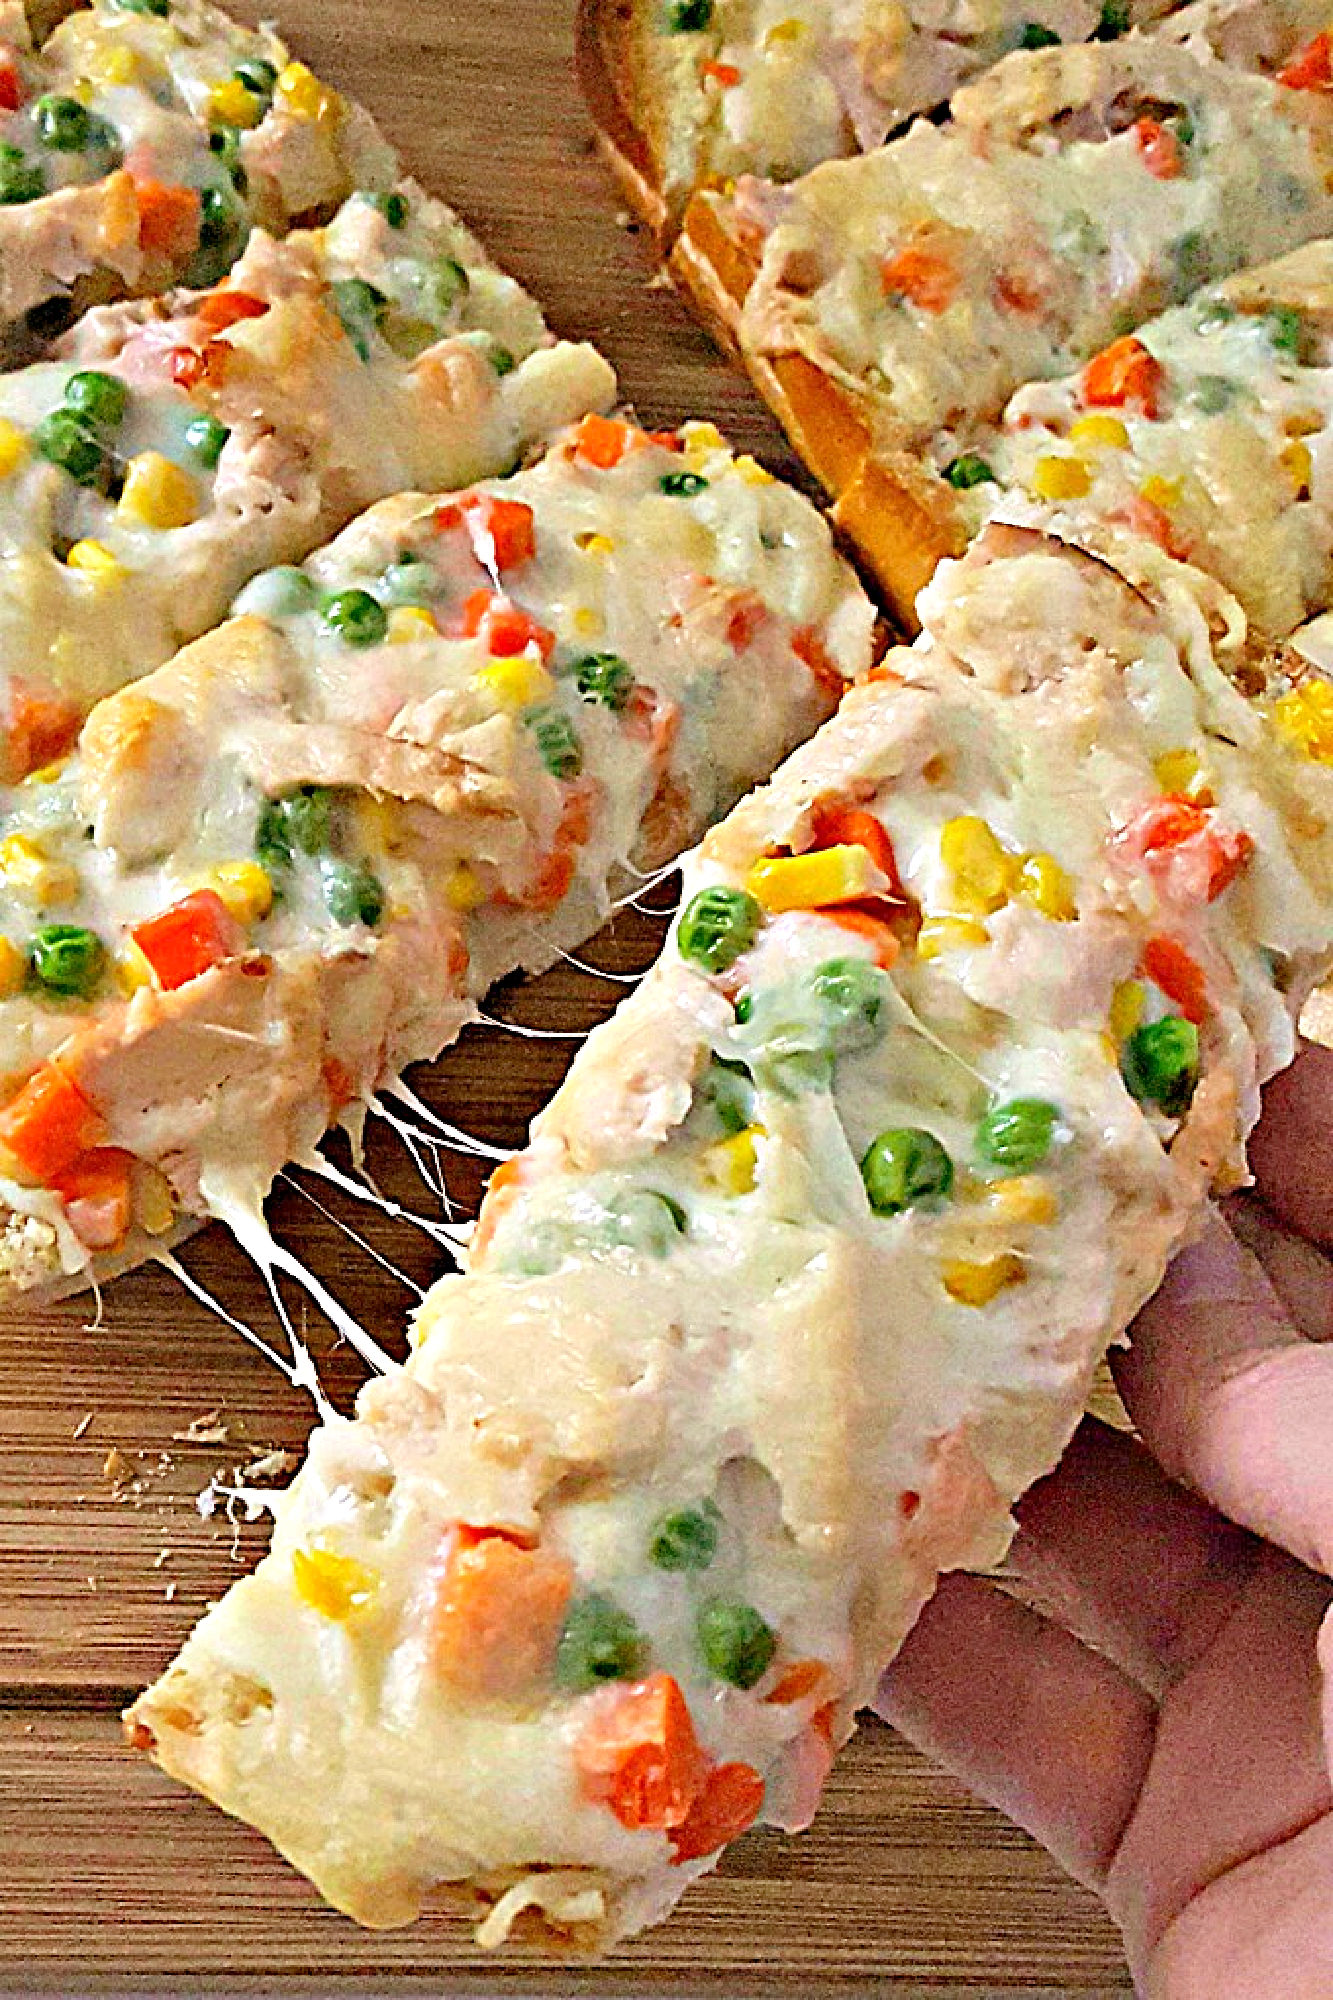 Get ready for a flavor explosion with Chicken Pot Pie French Bread Pizza.  It's the ultimate comfort food mashup. Trust us, one bite and you'll be hooked. #OurFamilyTable #ChickenPotPiePizza #FrenchBreadPizza #EasyDinnerRecipes #HomemadeComfortFood #FamilyDinnerIdeas
